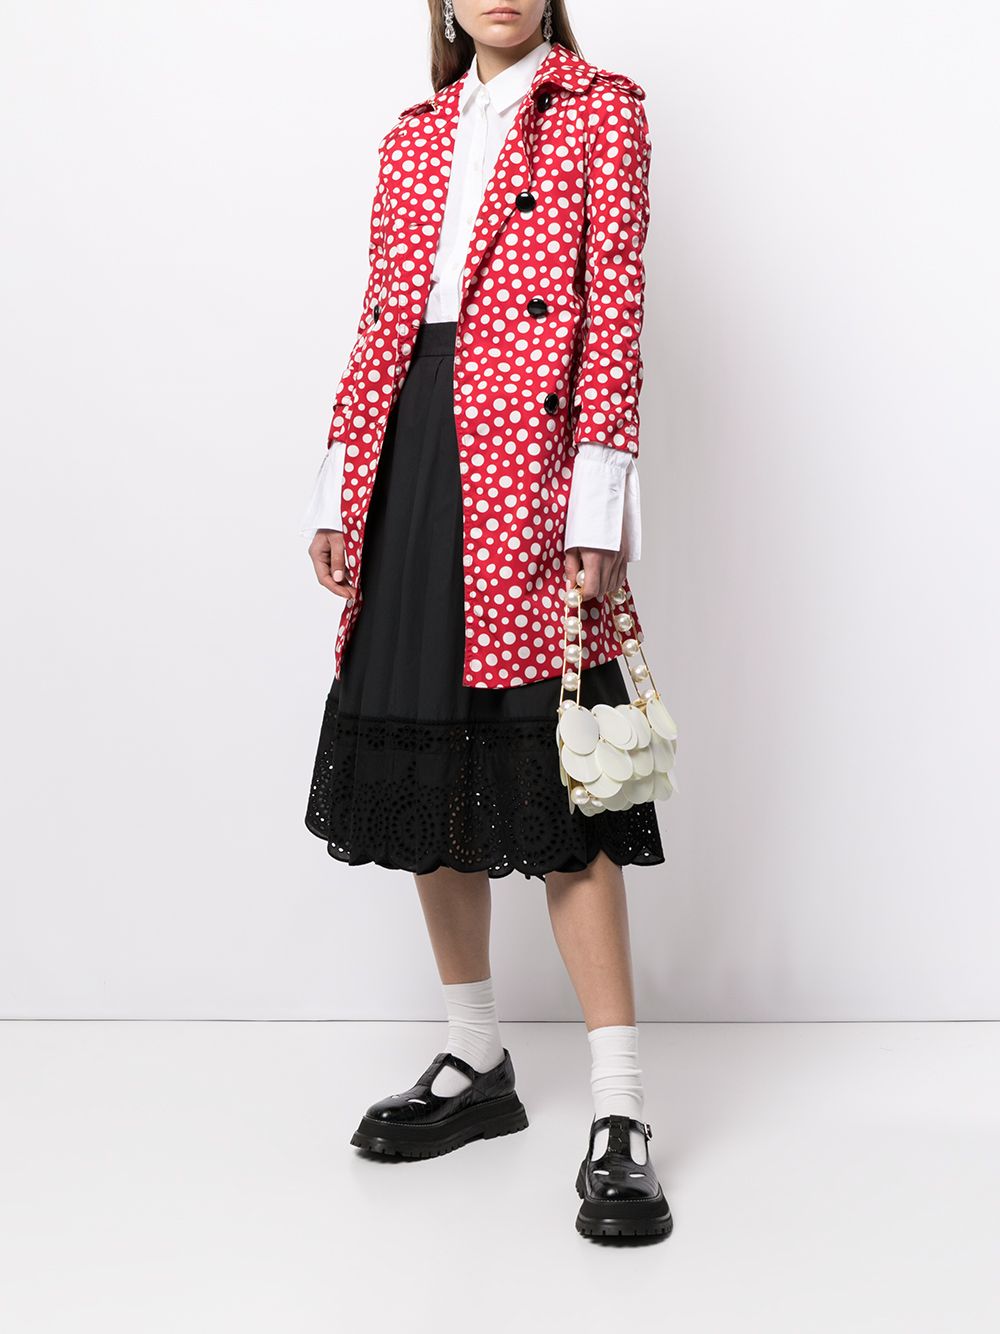 Vuitton - Old - All - Louis Vuitton pre-owned Dots Infinity Yayoi Kusama  trench coat - M41426 – dct - Louis - 50 - Monogram - Style - ep_vintage  luxury Store - Bag - Keep - Boston